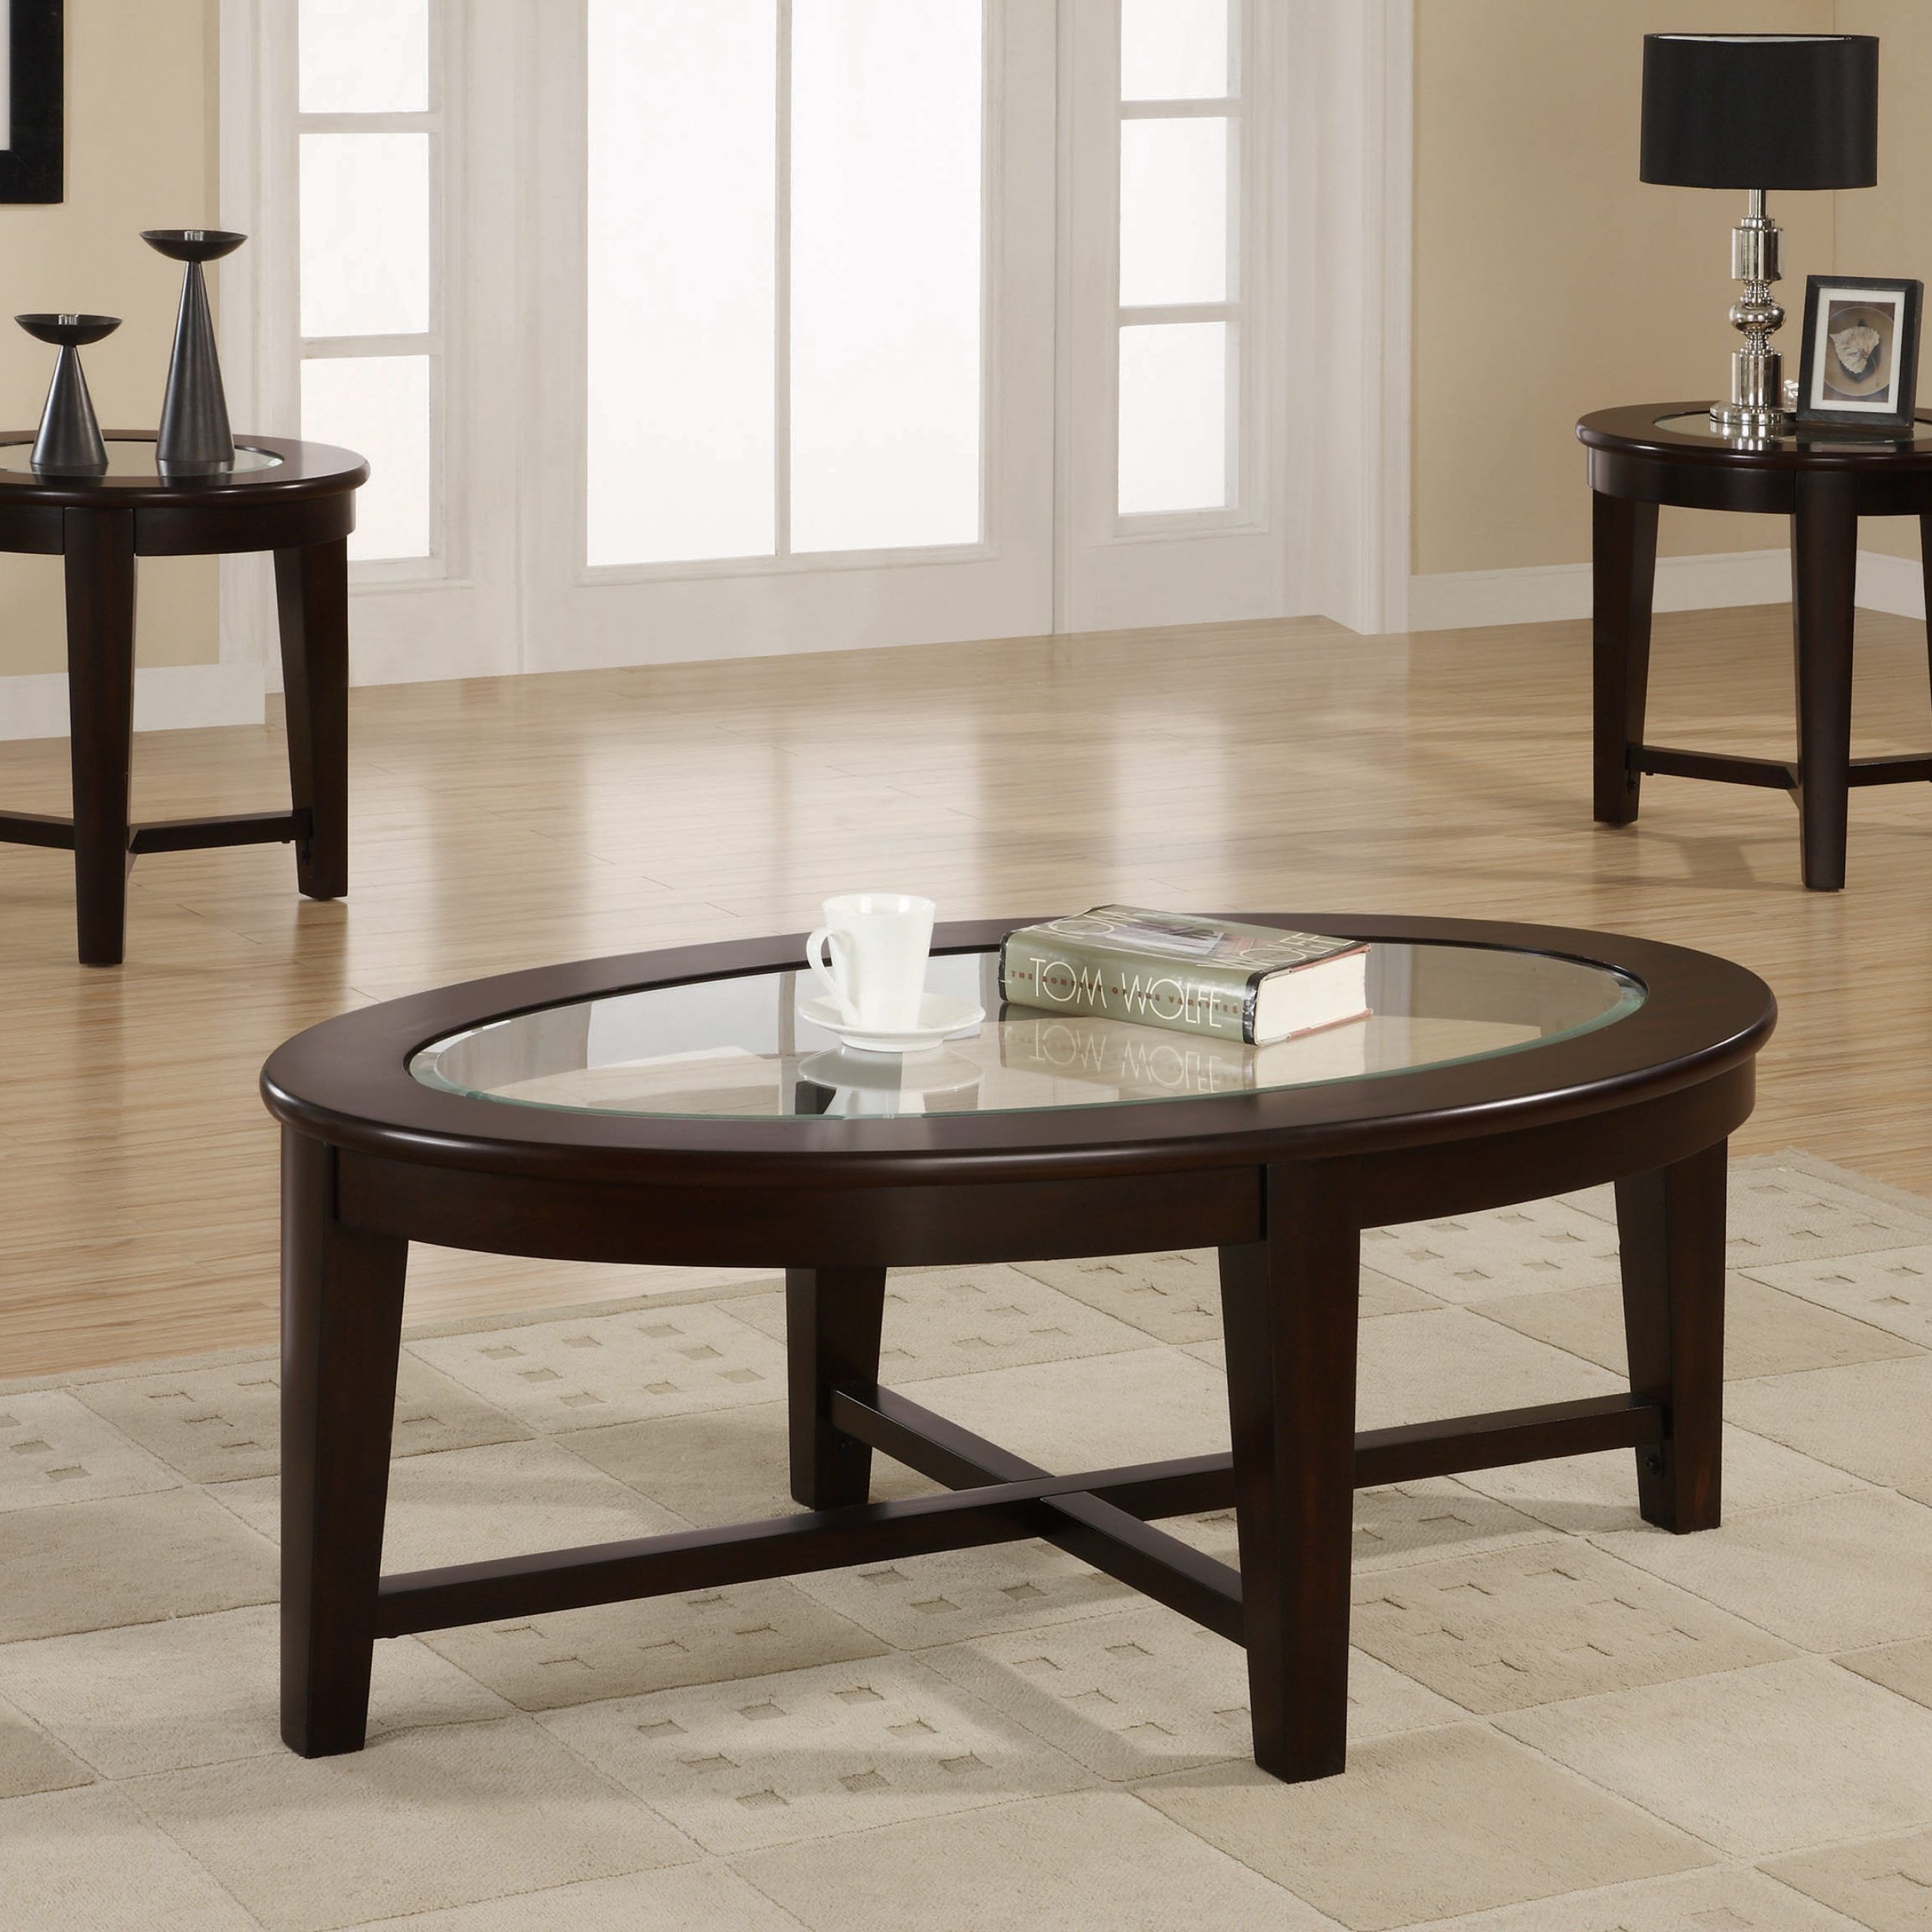 3 Piece Occasional Table Set Cappuccino – Coaster Fine Furniture For Occasional Coffee Tables (View 17 of 20)